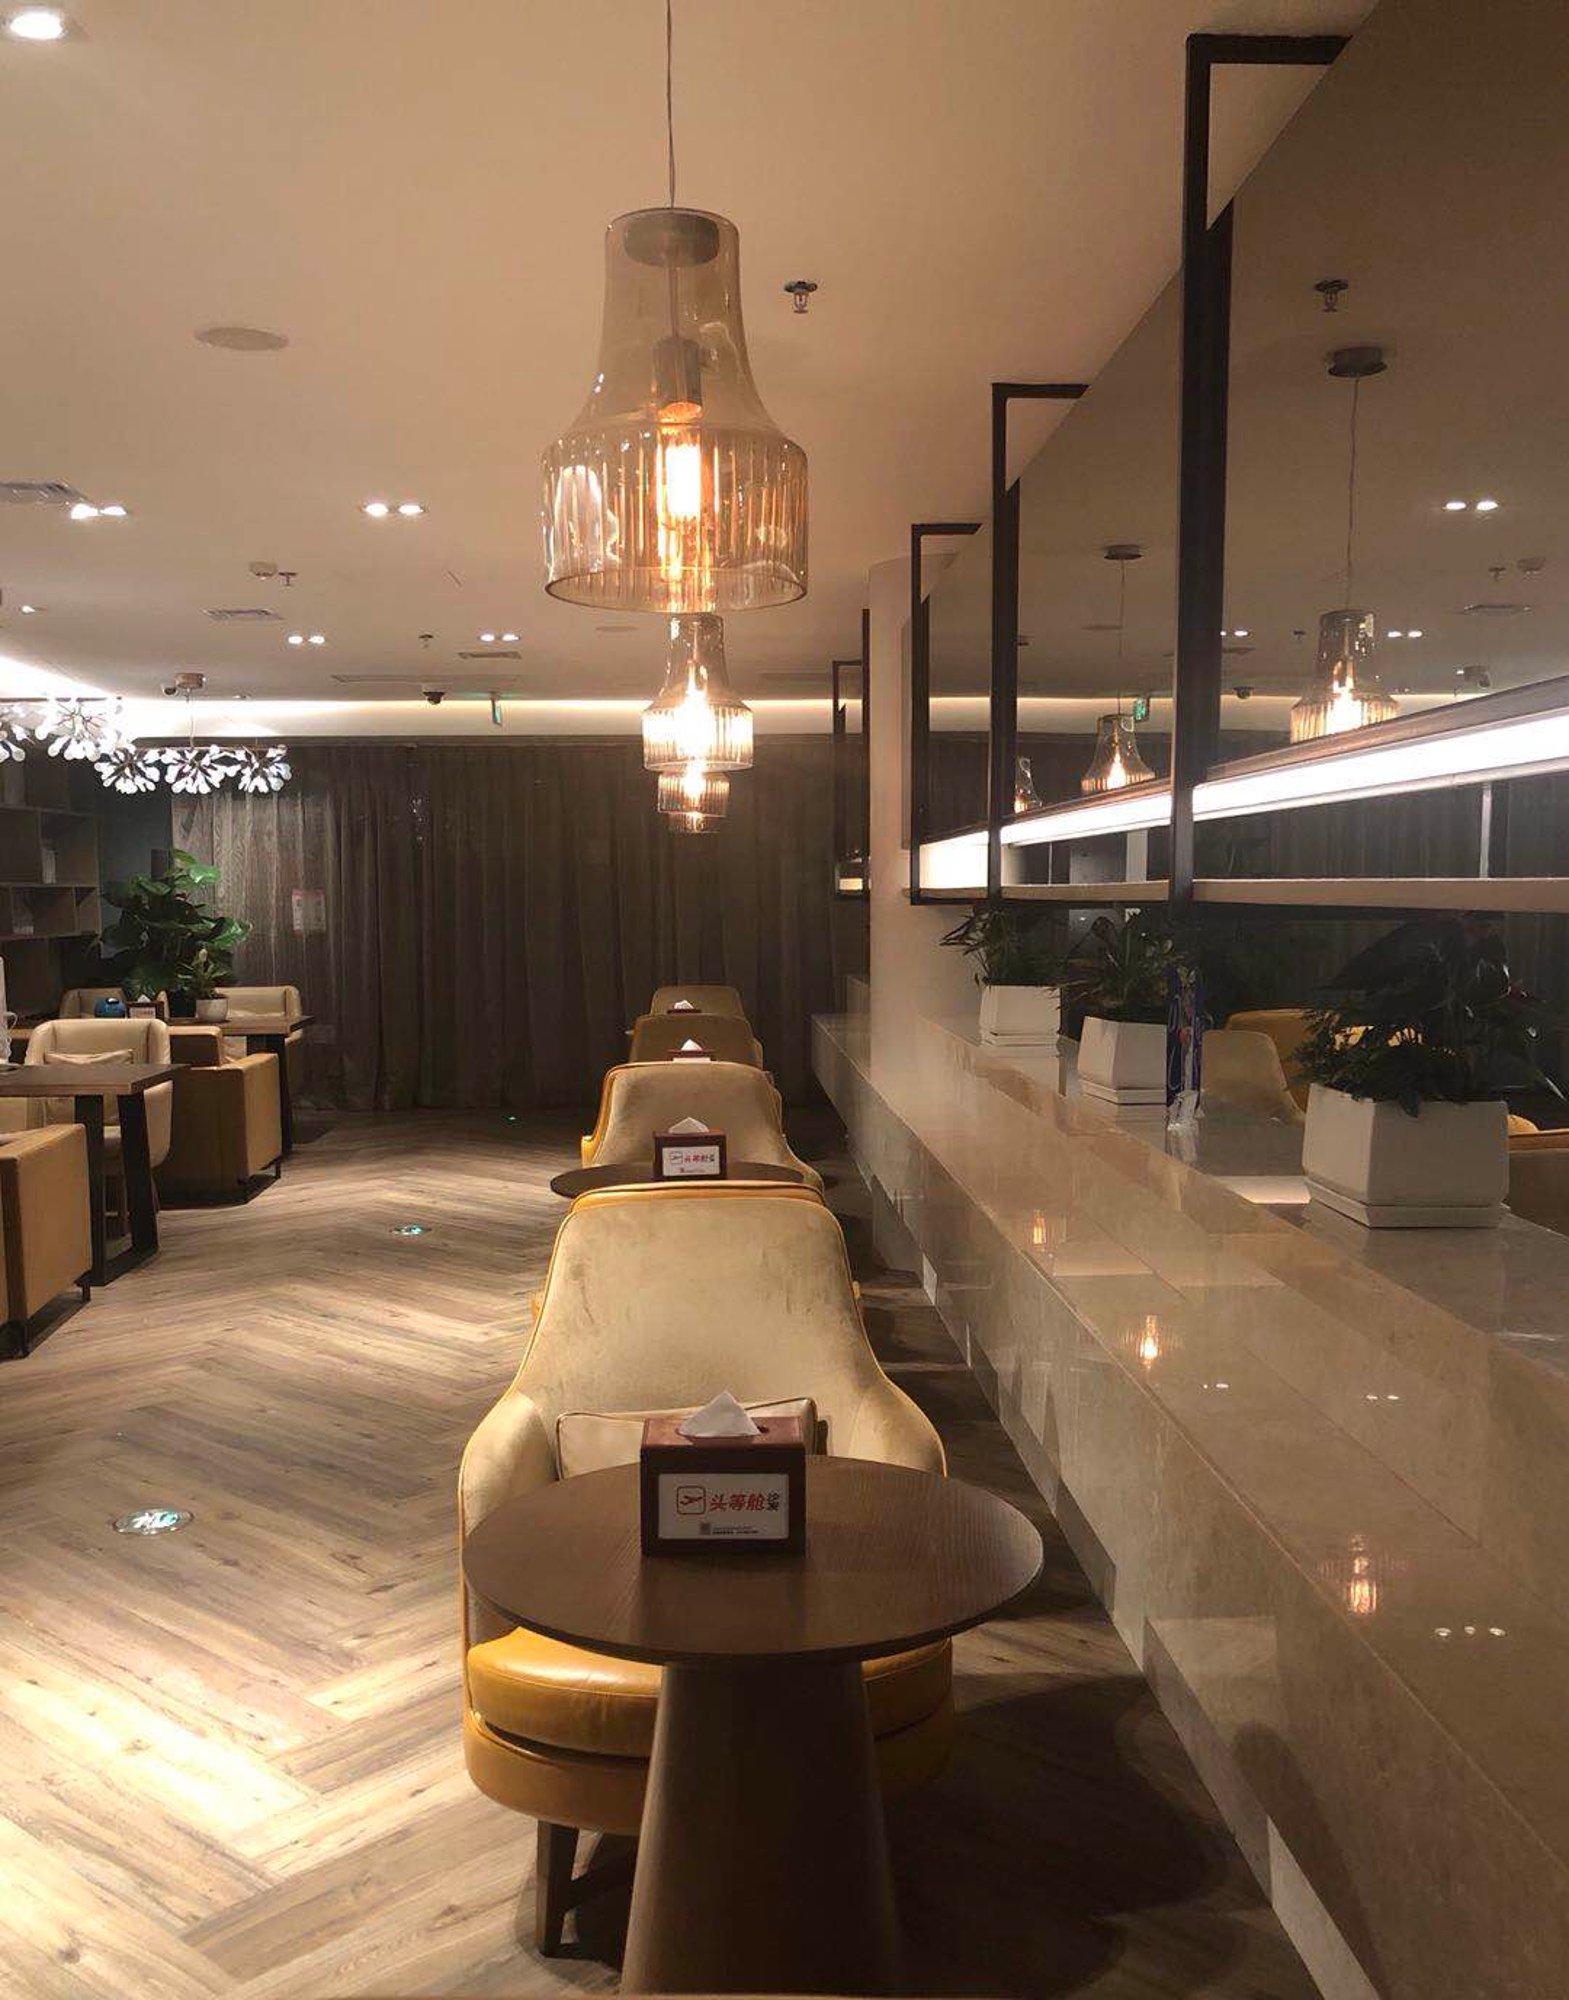 Shenzhen Airport First & Business Class Lounge (Joyee 2) image 9 of 9